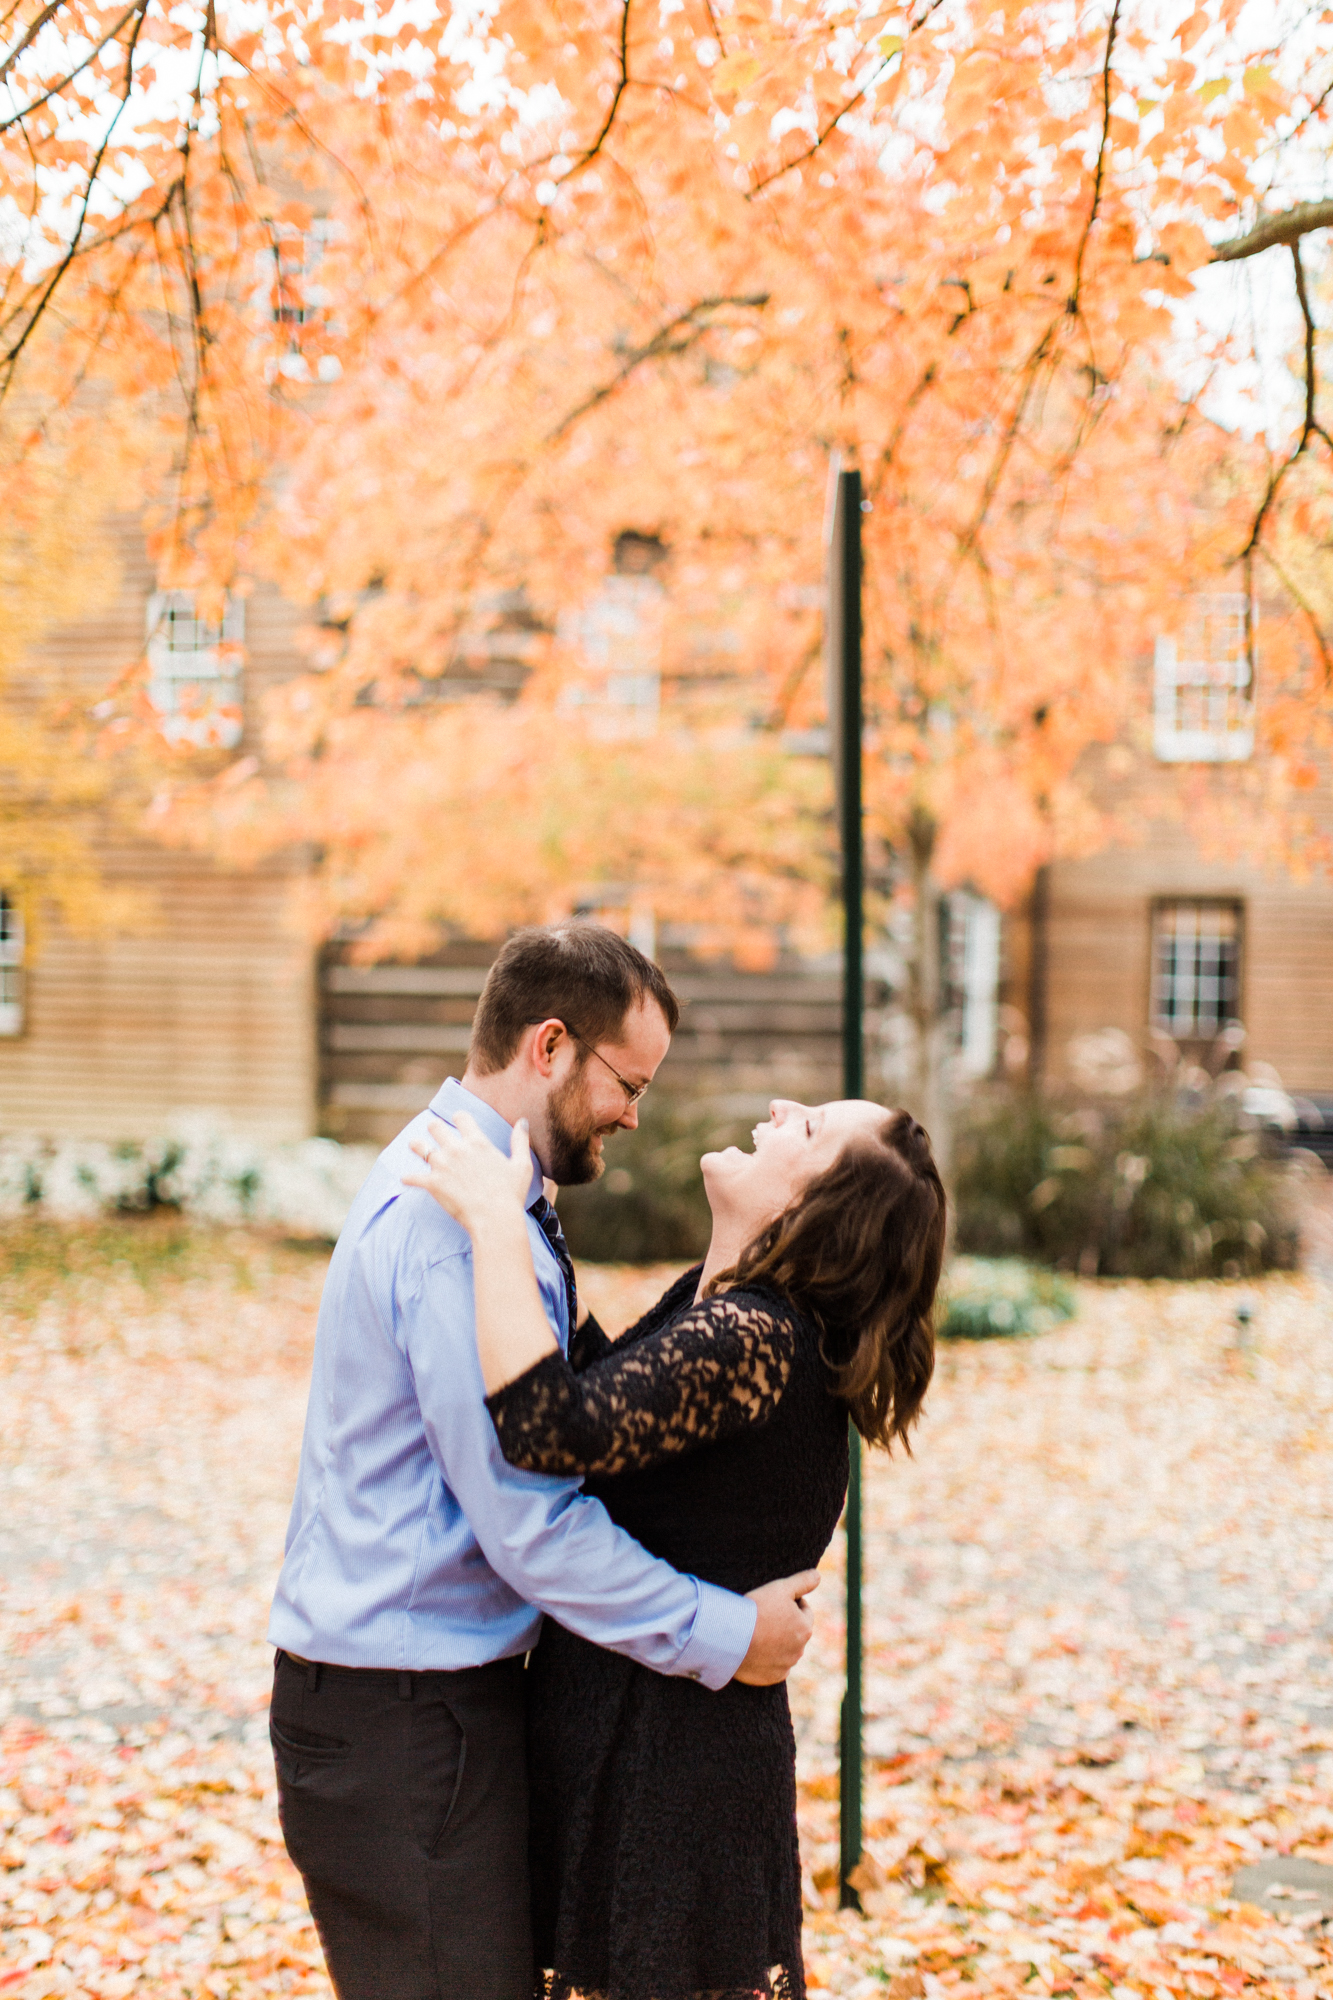 Courtney and Scott's Fall Engagement Session in New Harmony. Photographed by Morgan Williams Photography.